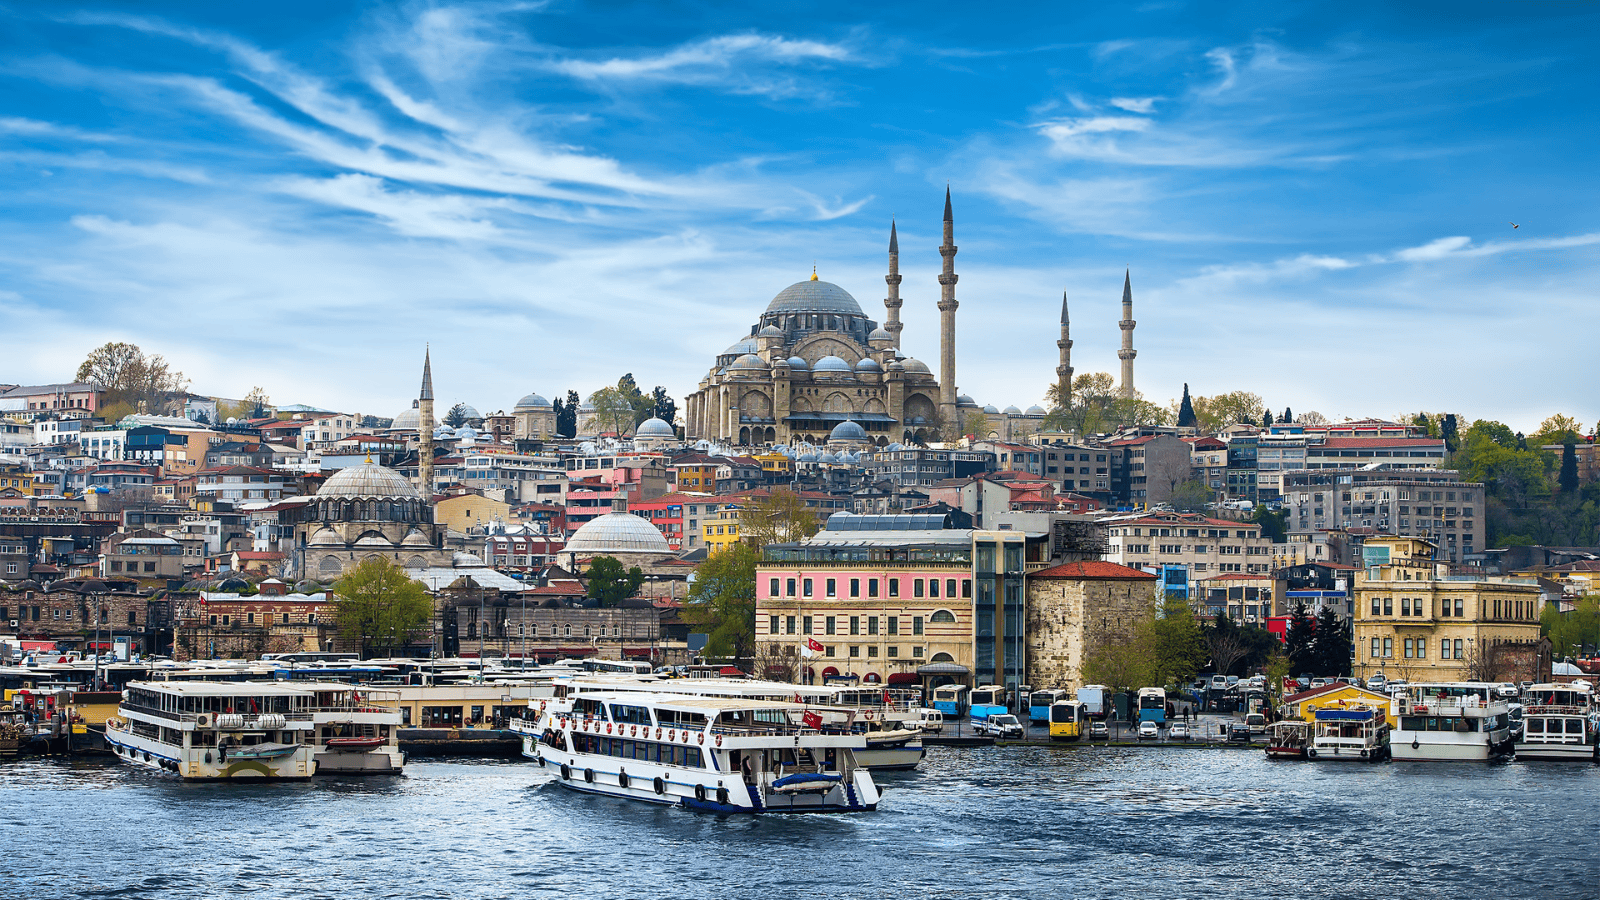 <p>Istanbul is fantastic for an overnight or multi-day getaway. Your money will go far in this affordable city. Its rich cultural heritage can be experienced through historical landmarks and <a href="https://whatthefab.com/local-markets-around-the-world.html" rel="follow">local markets</a>.</p><p>Consider using the <a href="https://www.turkishairlines.com/en-us/flights/stopover/" rel="nofollow external noopener noreferrer">Stopover in Istanbul</a> initiative available through Turkish Airlines. You may be eligible to stay free for up to three days in a 4- or 5-star hotel.</p>